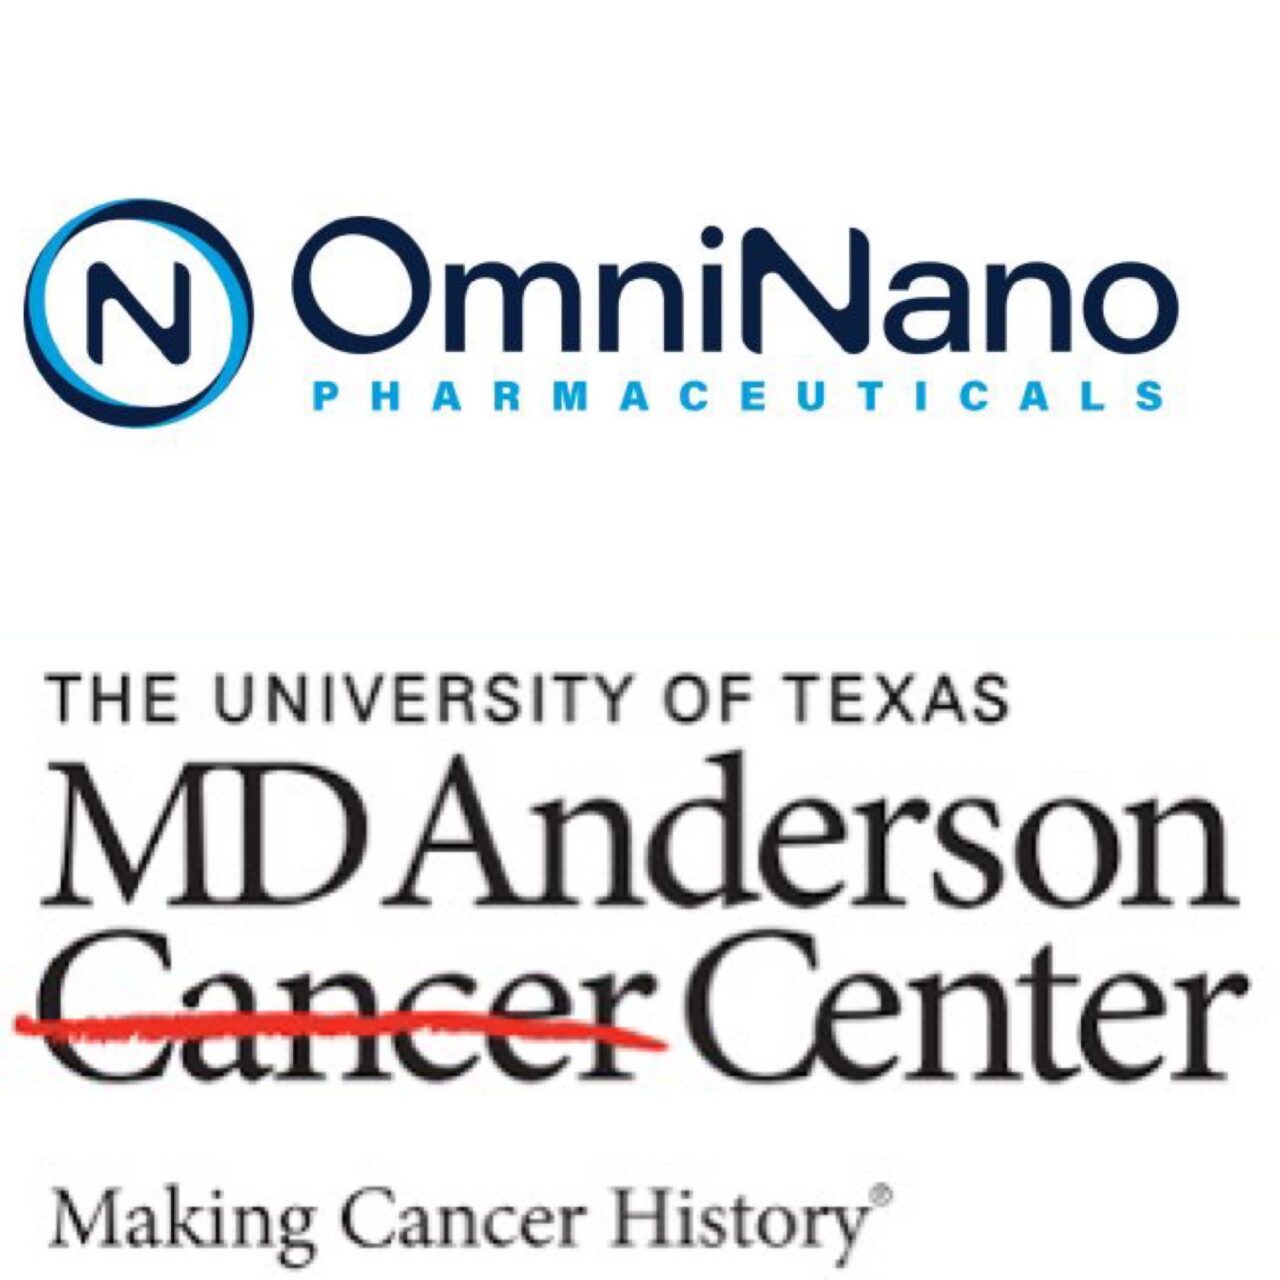 Guorong Ma: OmniNano Pharmaceuticals announce the execution of the Patent and Technology license with The University of Texas MD Anderson Cancer Center